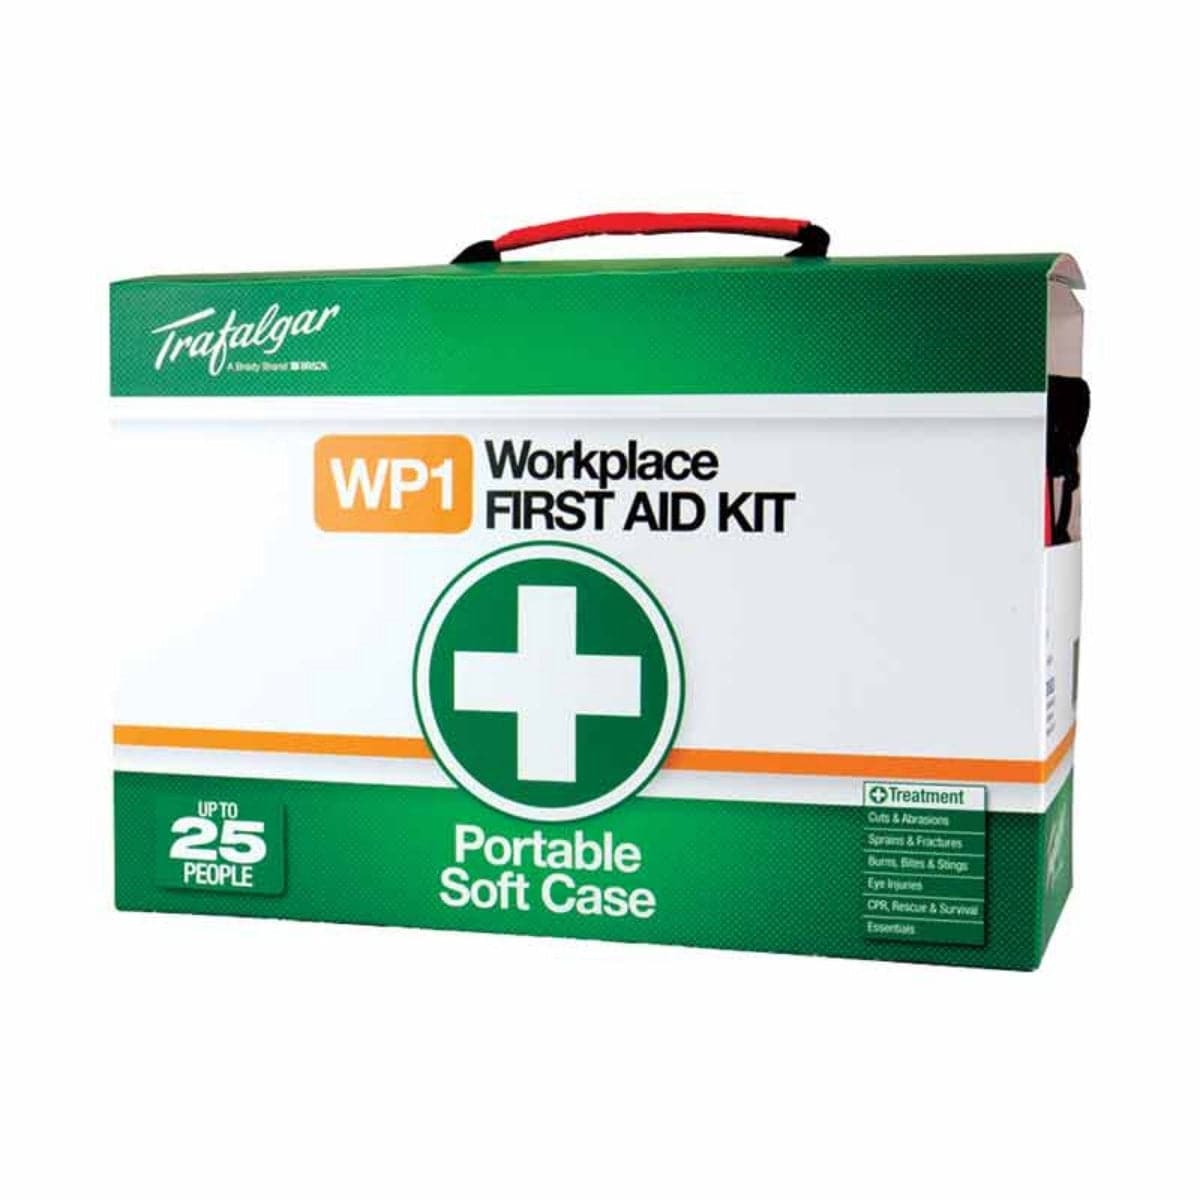 Small Workplace First Aid Kit - soft case